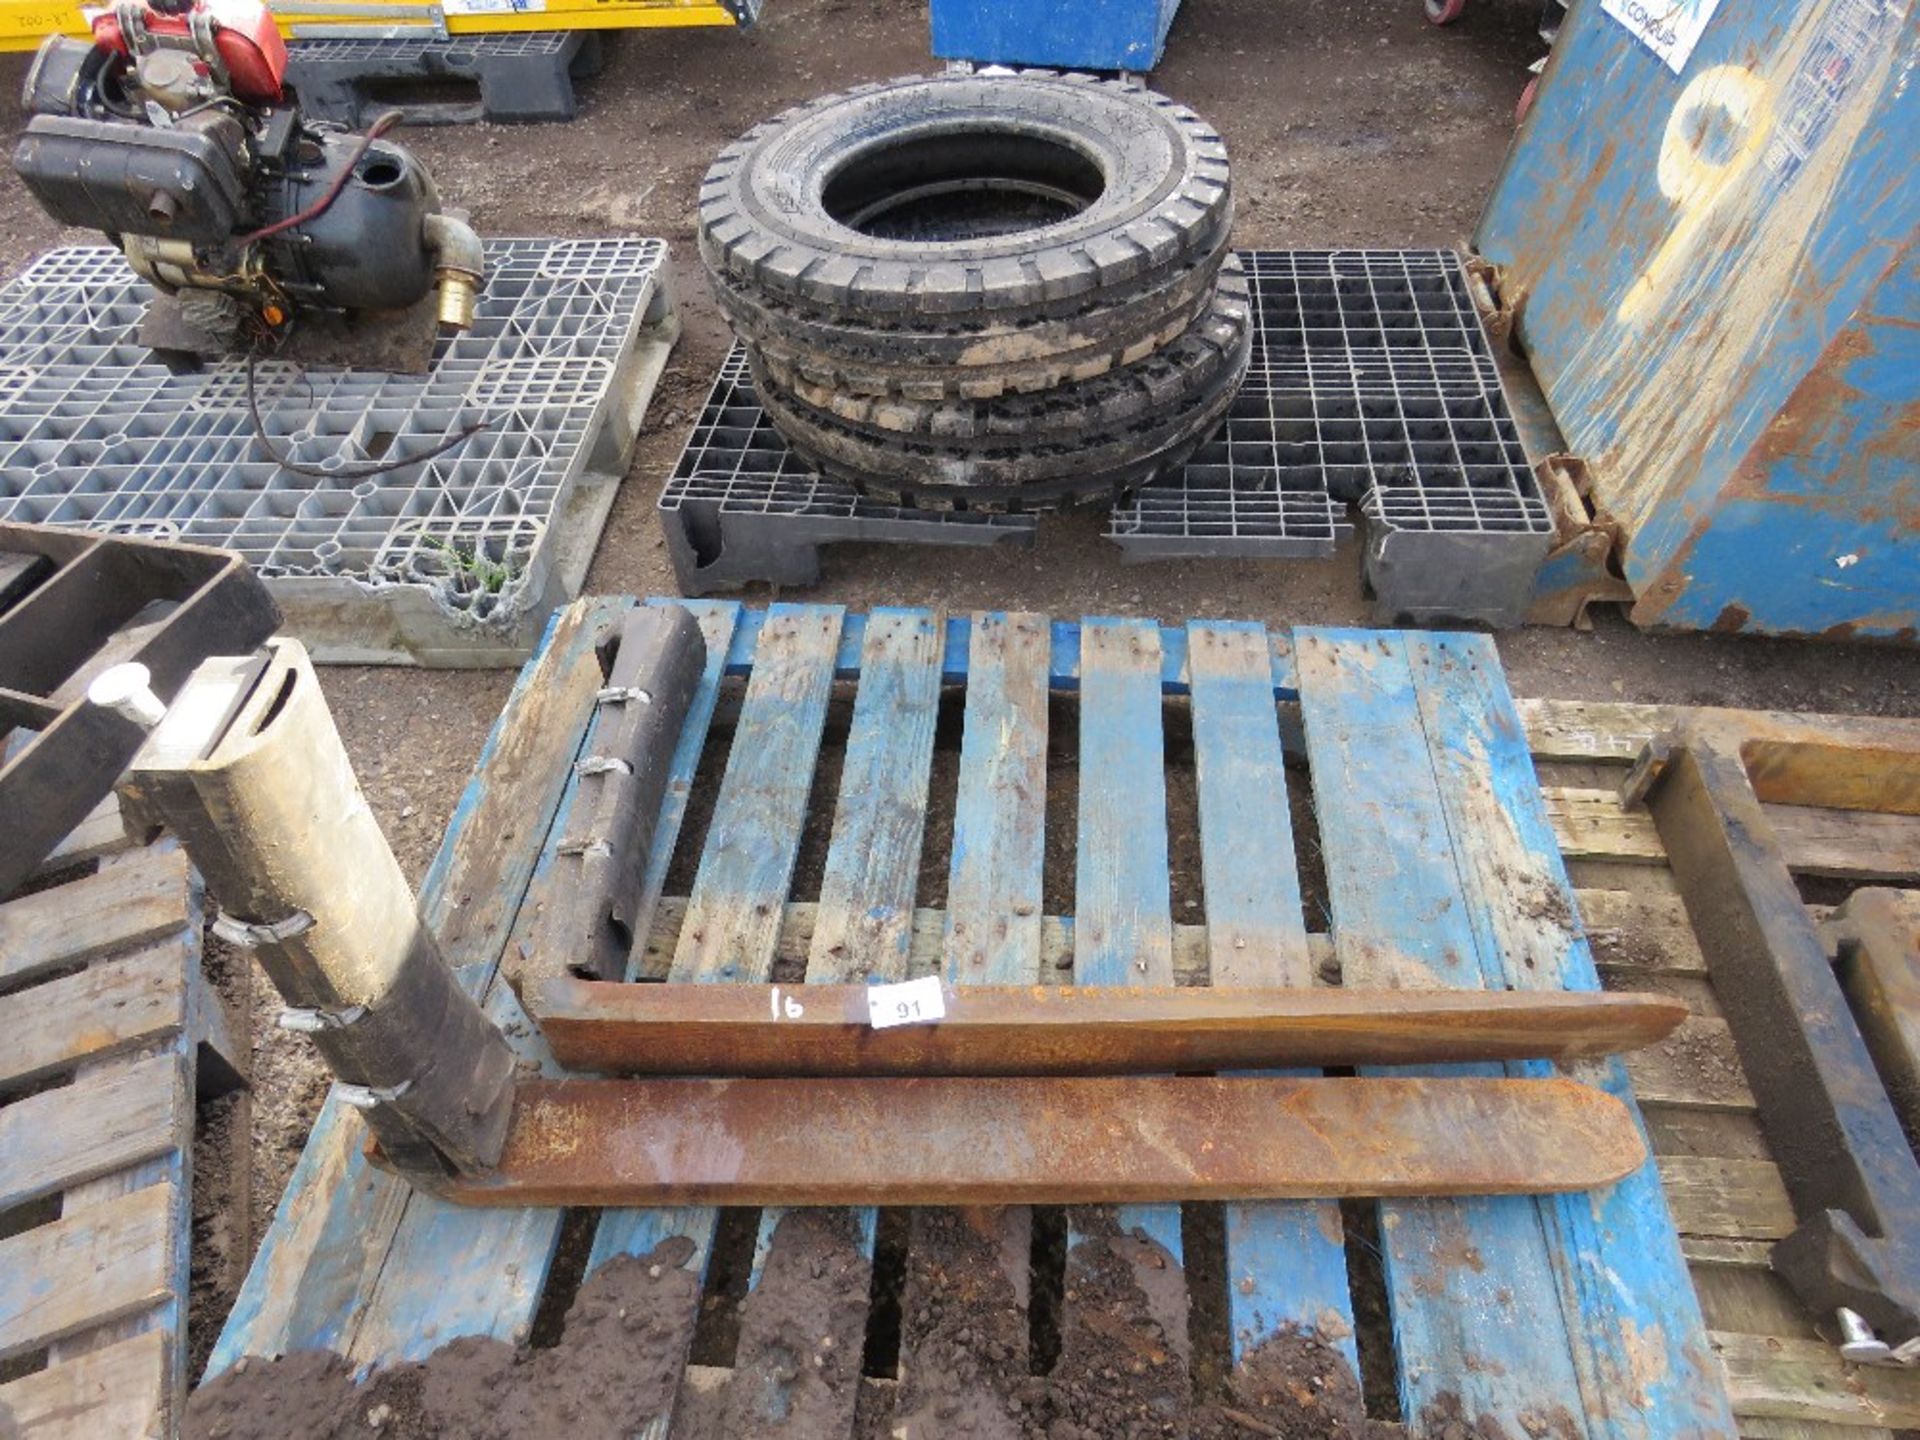 PAIR OF FORKLIFT TINES FOR 16" CARRIAGE.